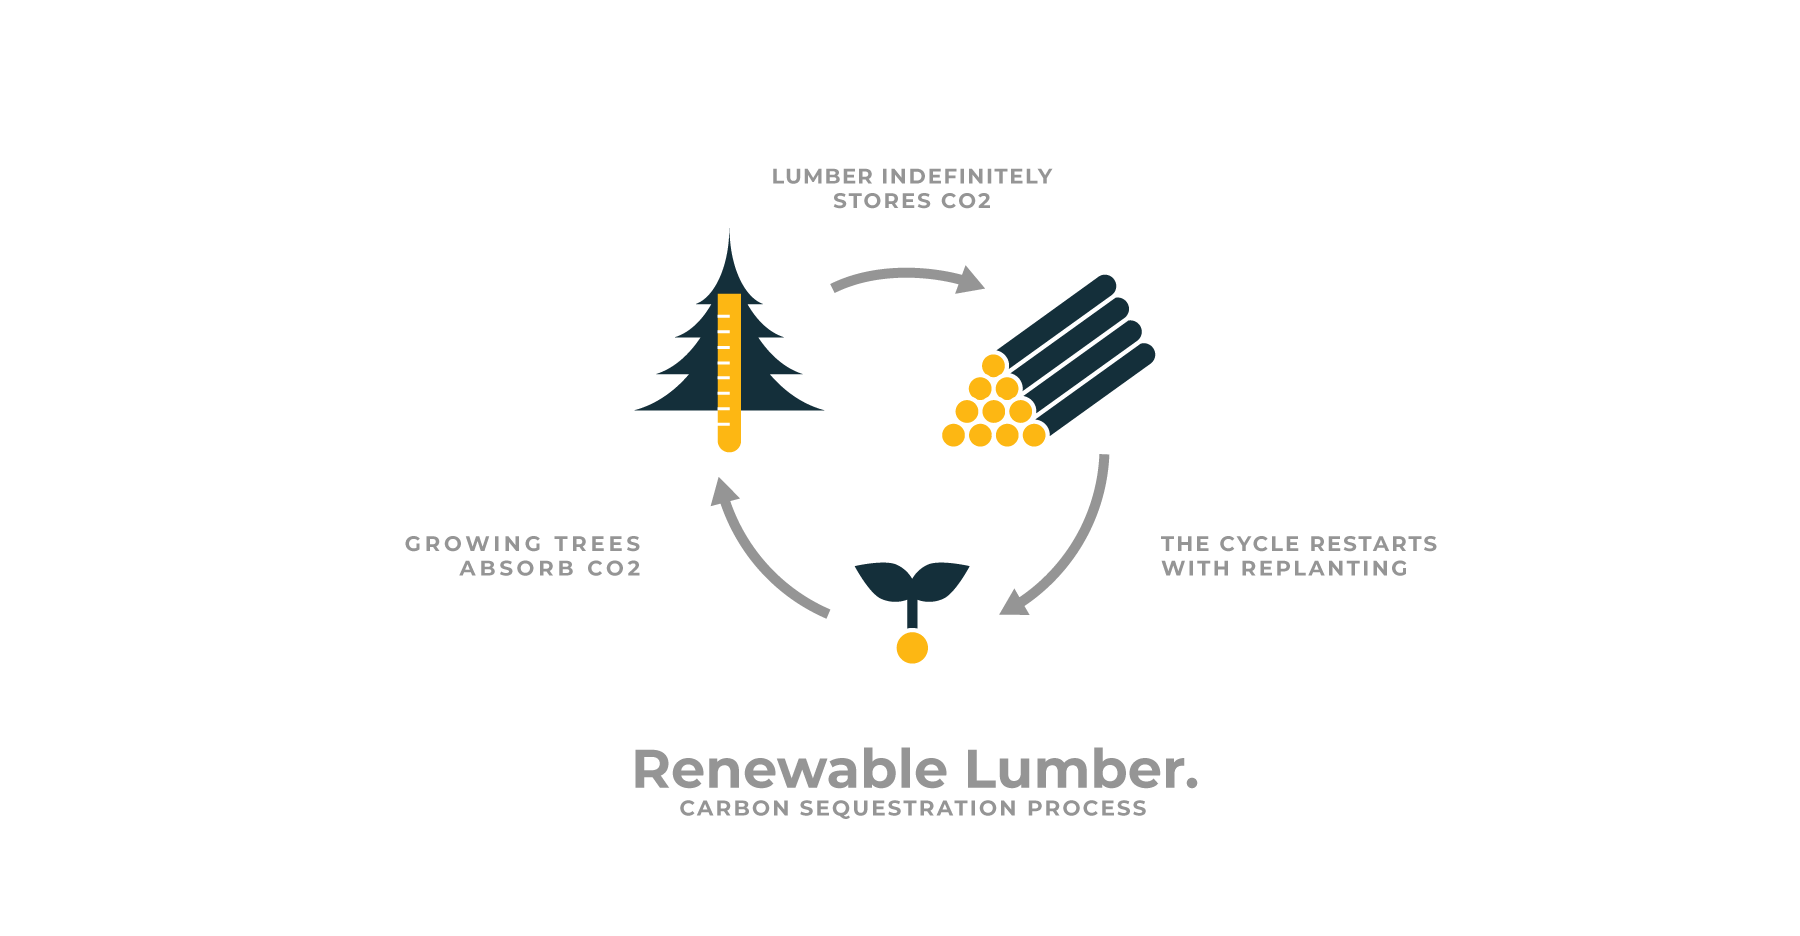 Carbon Sequestration Process Diagram showing how renewable lumber in modern home design benefits environment.